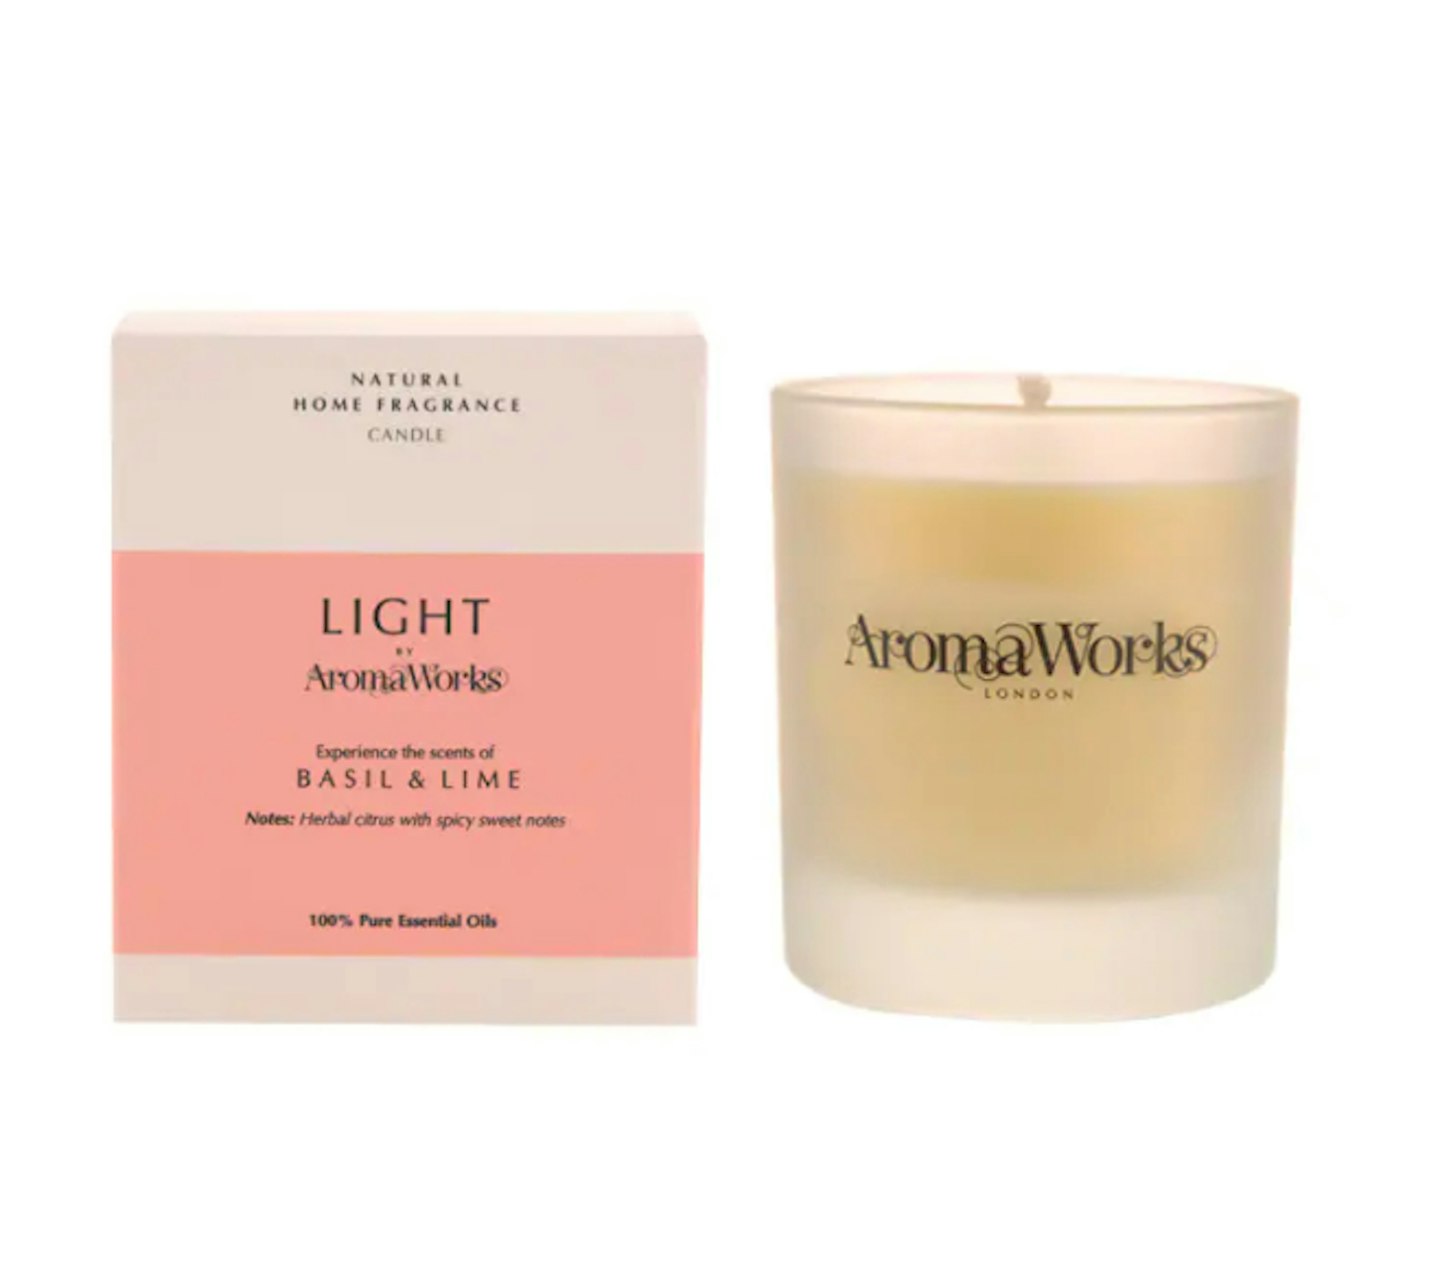 Aromaworks candle